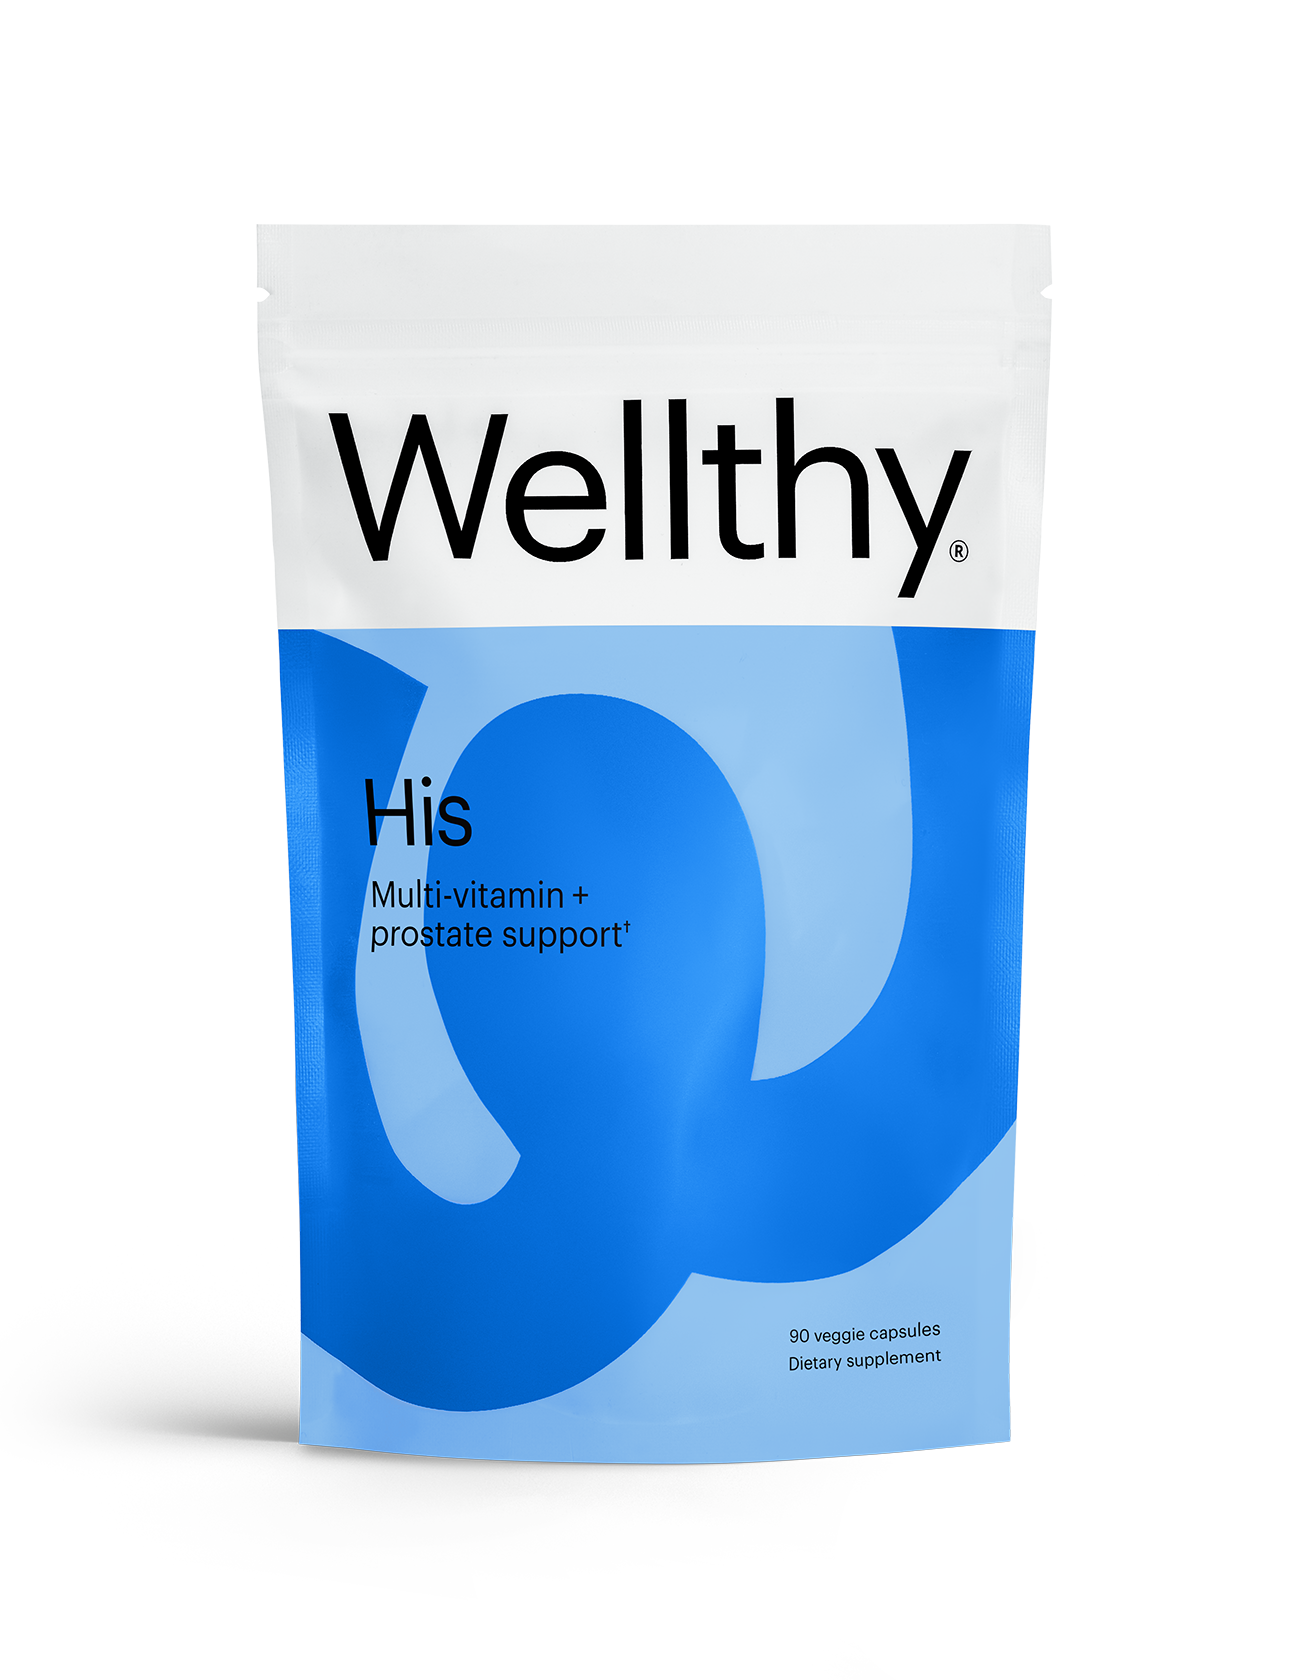 HIS: Men's multivitamin plus prostate support Supplements Wellthy Nutraceuticals 